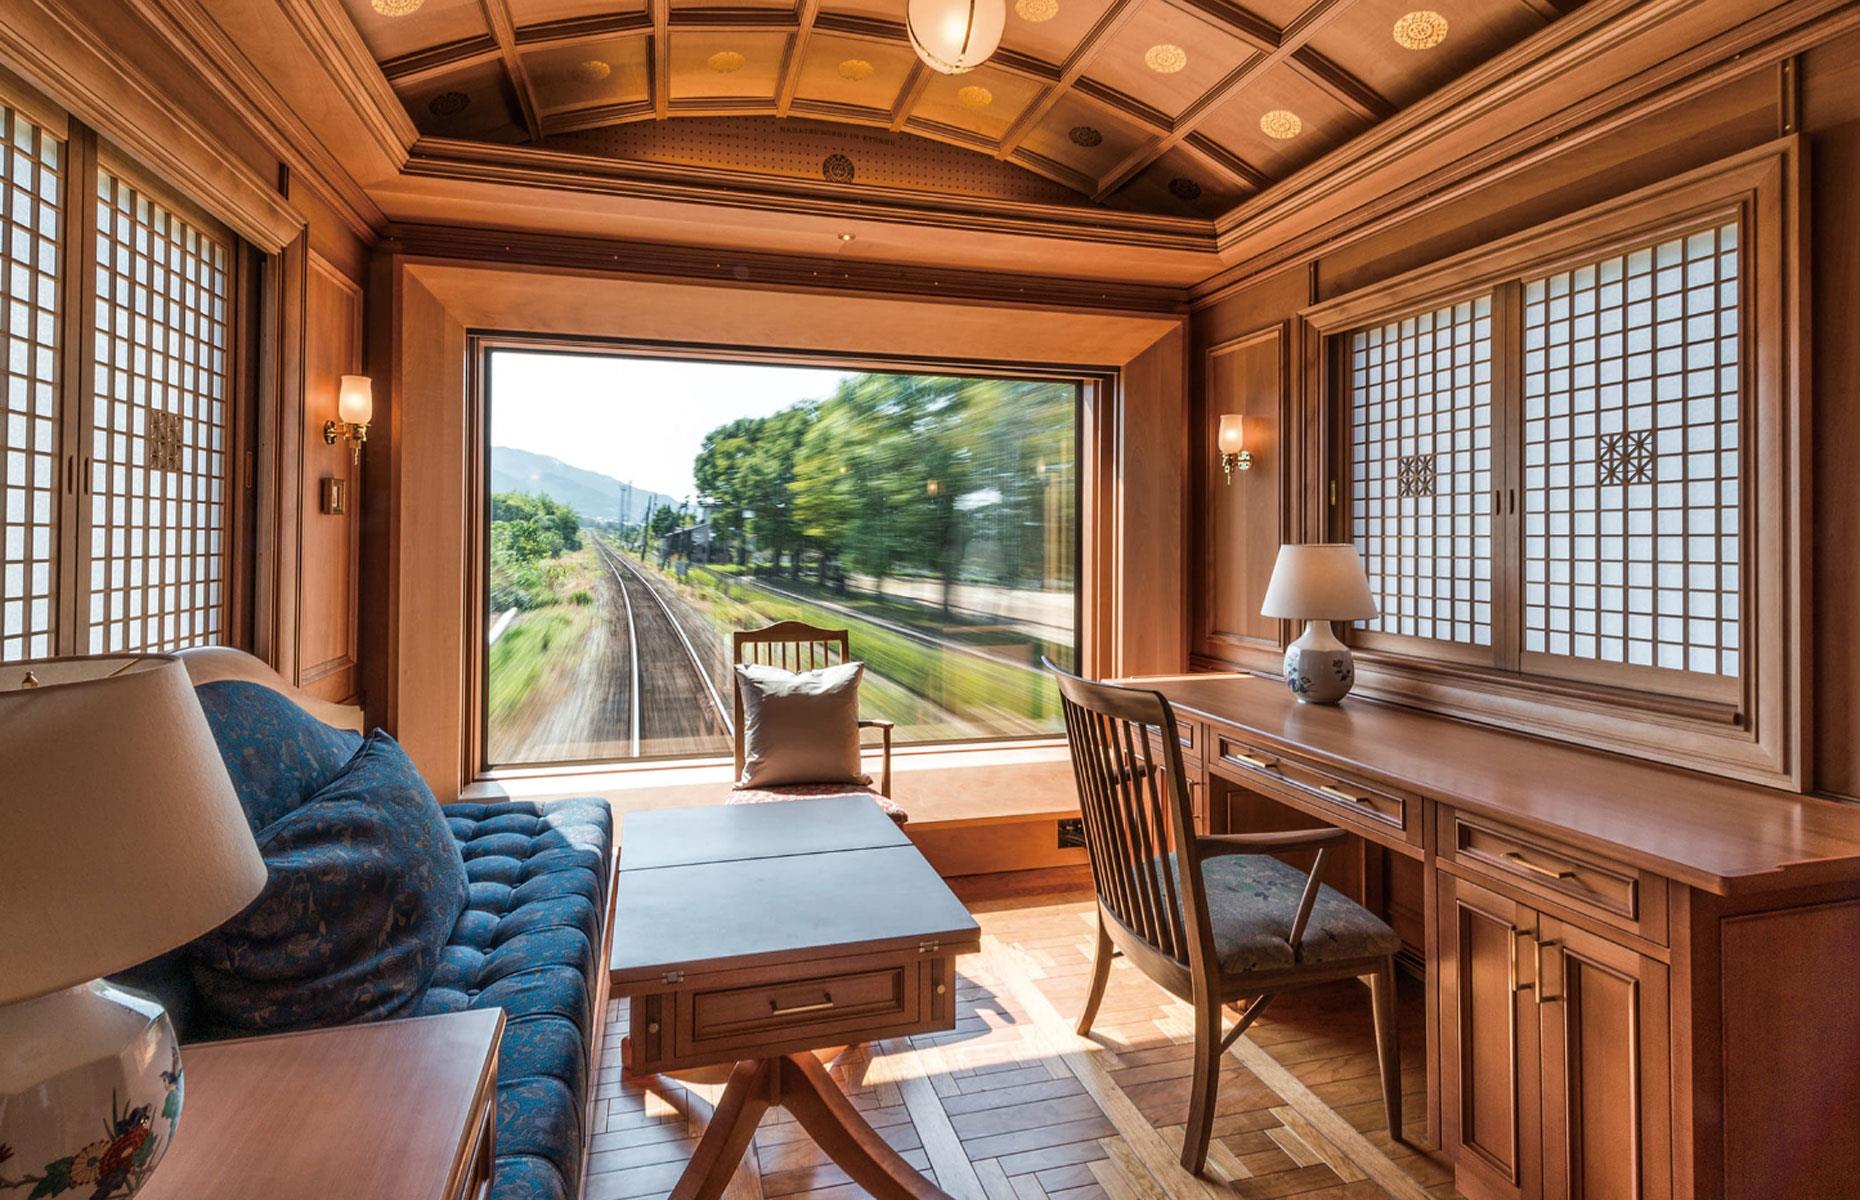 <p>A ravishing fusion of Japanese and Western design, the wood-paneled carriages include a dining car serving epicurean delights from the region, a piano lounge, and a traditional Japanese tea room.</p>  <p>The train's two Deluxe Suites are the most expensive, so naturally the hardest to secure. The larger of the pair is 226 square feet (21 square meters) and features a lounge area, sleeping area, and ensuite bathroom. But the pièce de résistance is most definitely that sensational rear window (shown here). </p>  <p>A Deluxe Suite costs 1.5 million yen per person for a two-day, one-night trip, which equates to a whopping $10,150 (£8,059).</p>